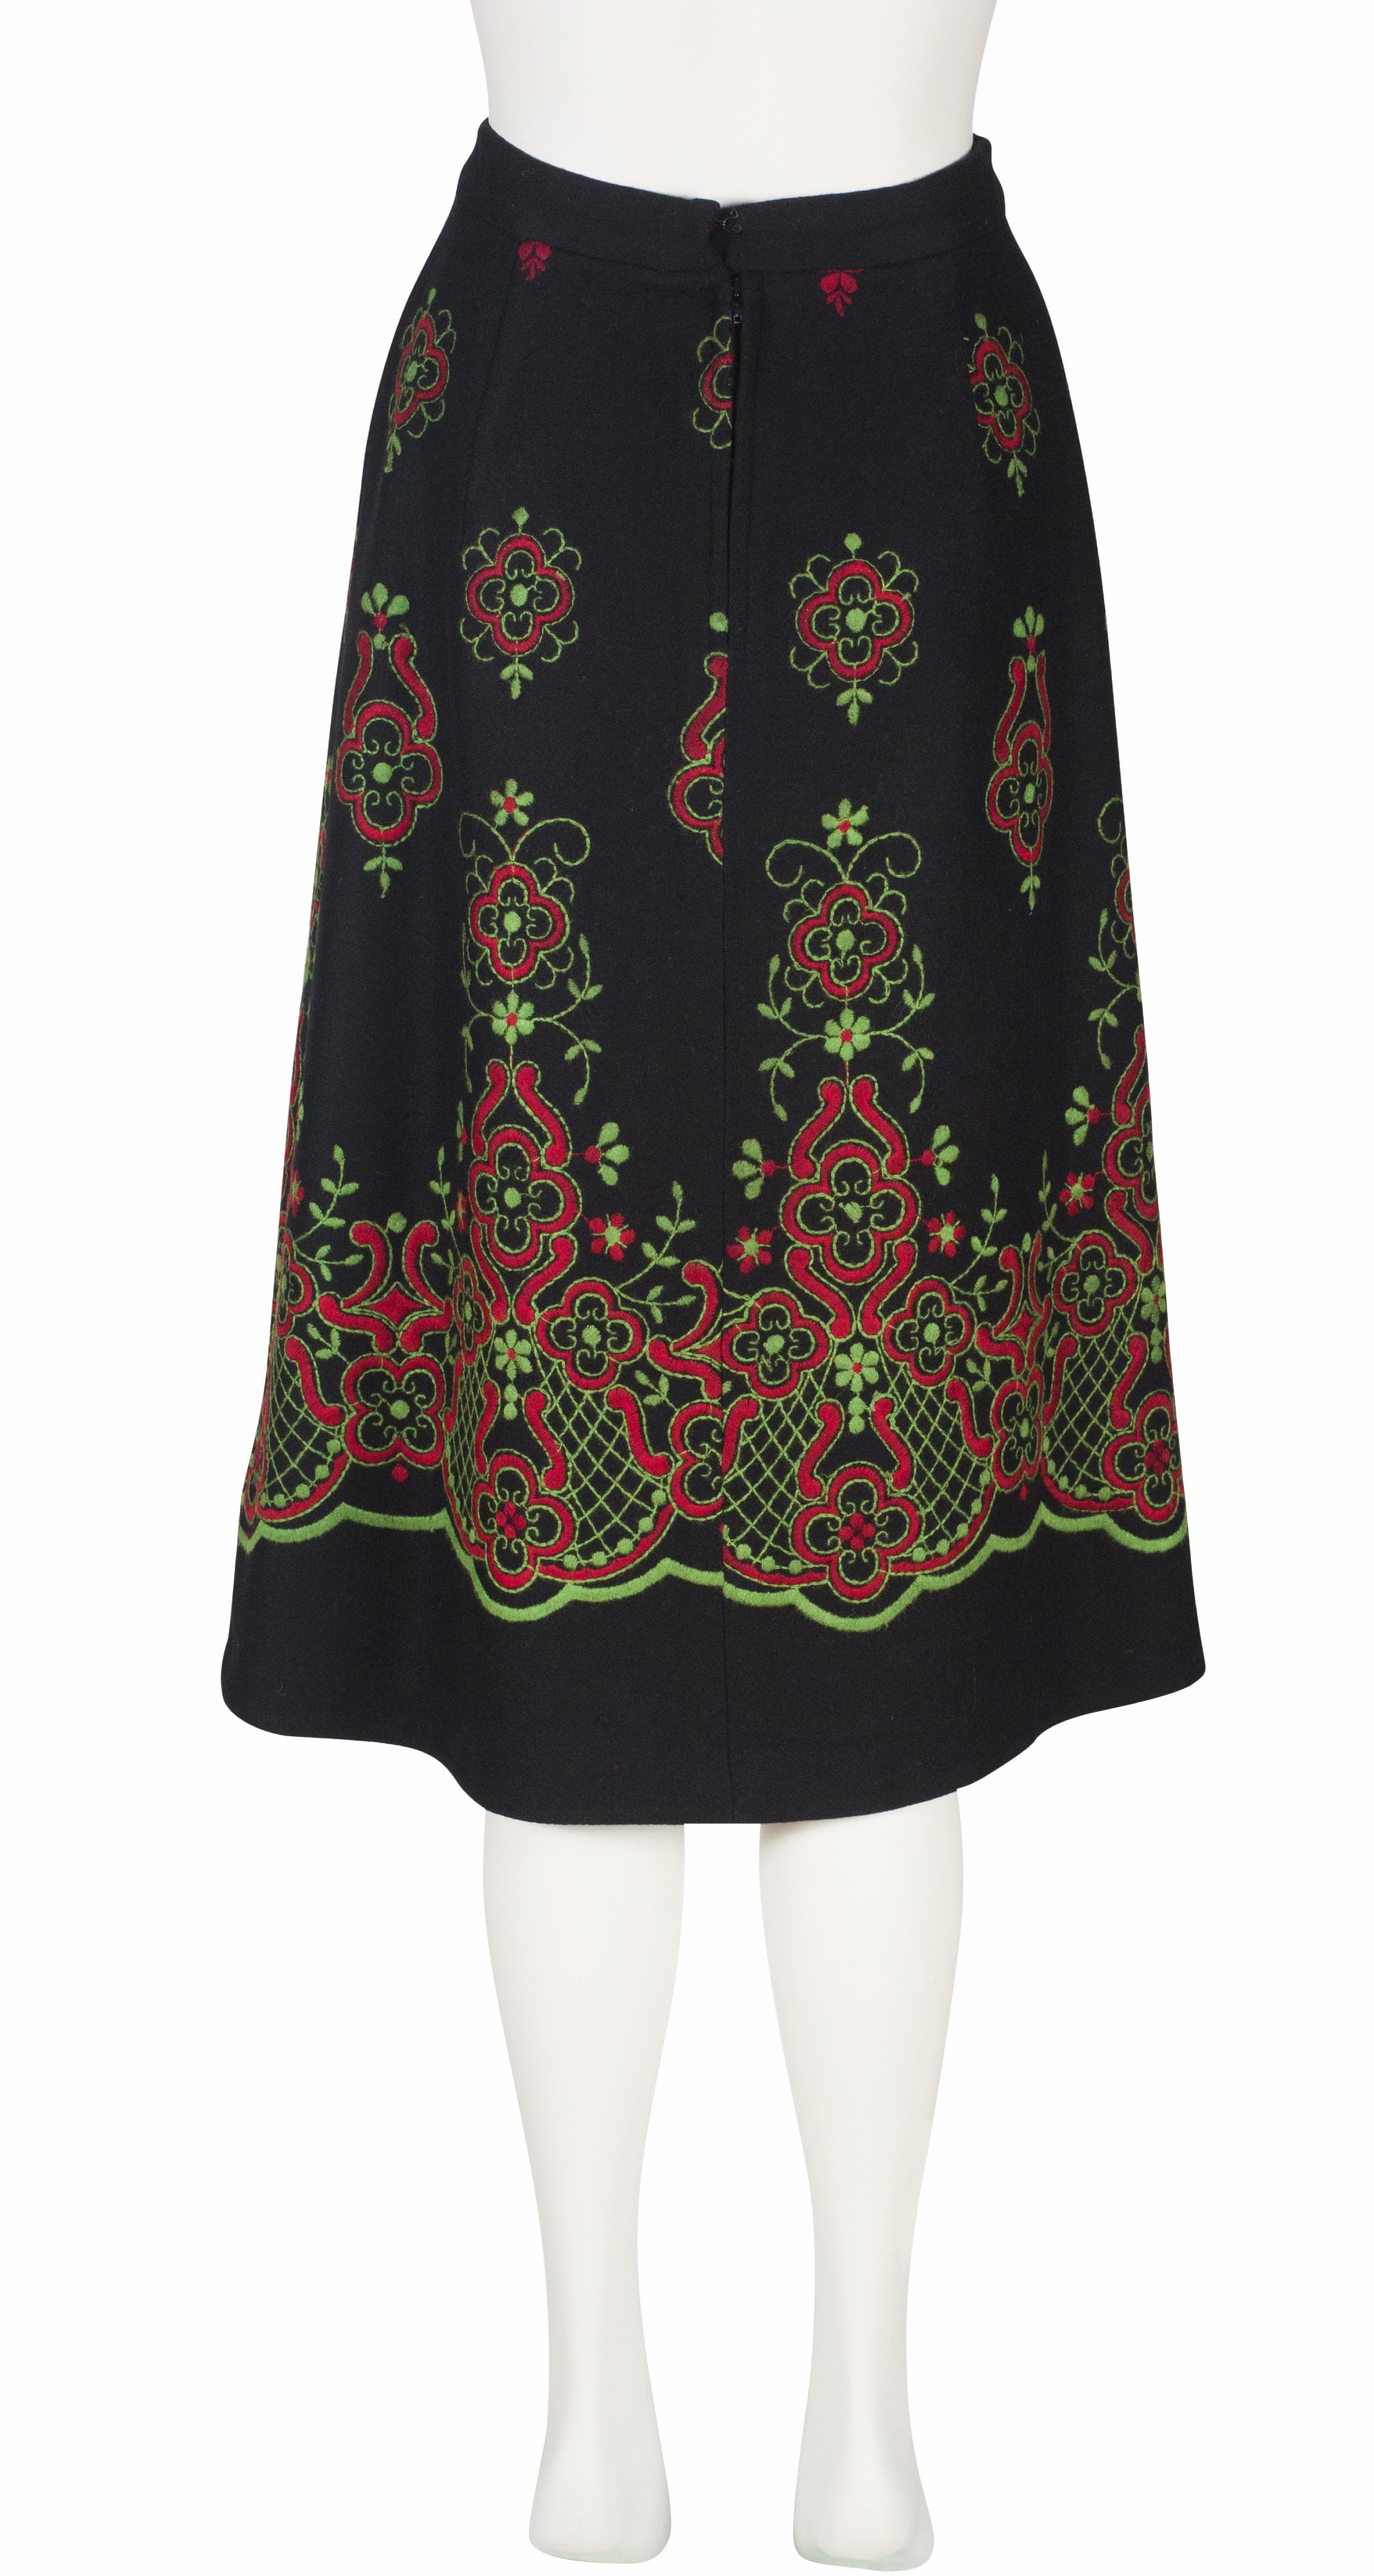 1970s Green & Red Embroidered Black Wool A-Line Skirt